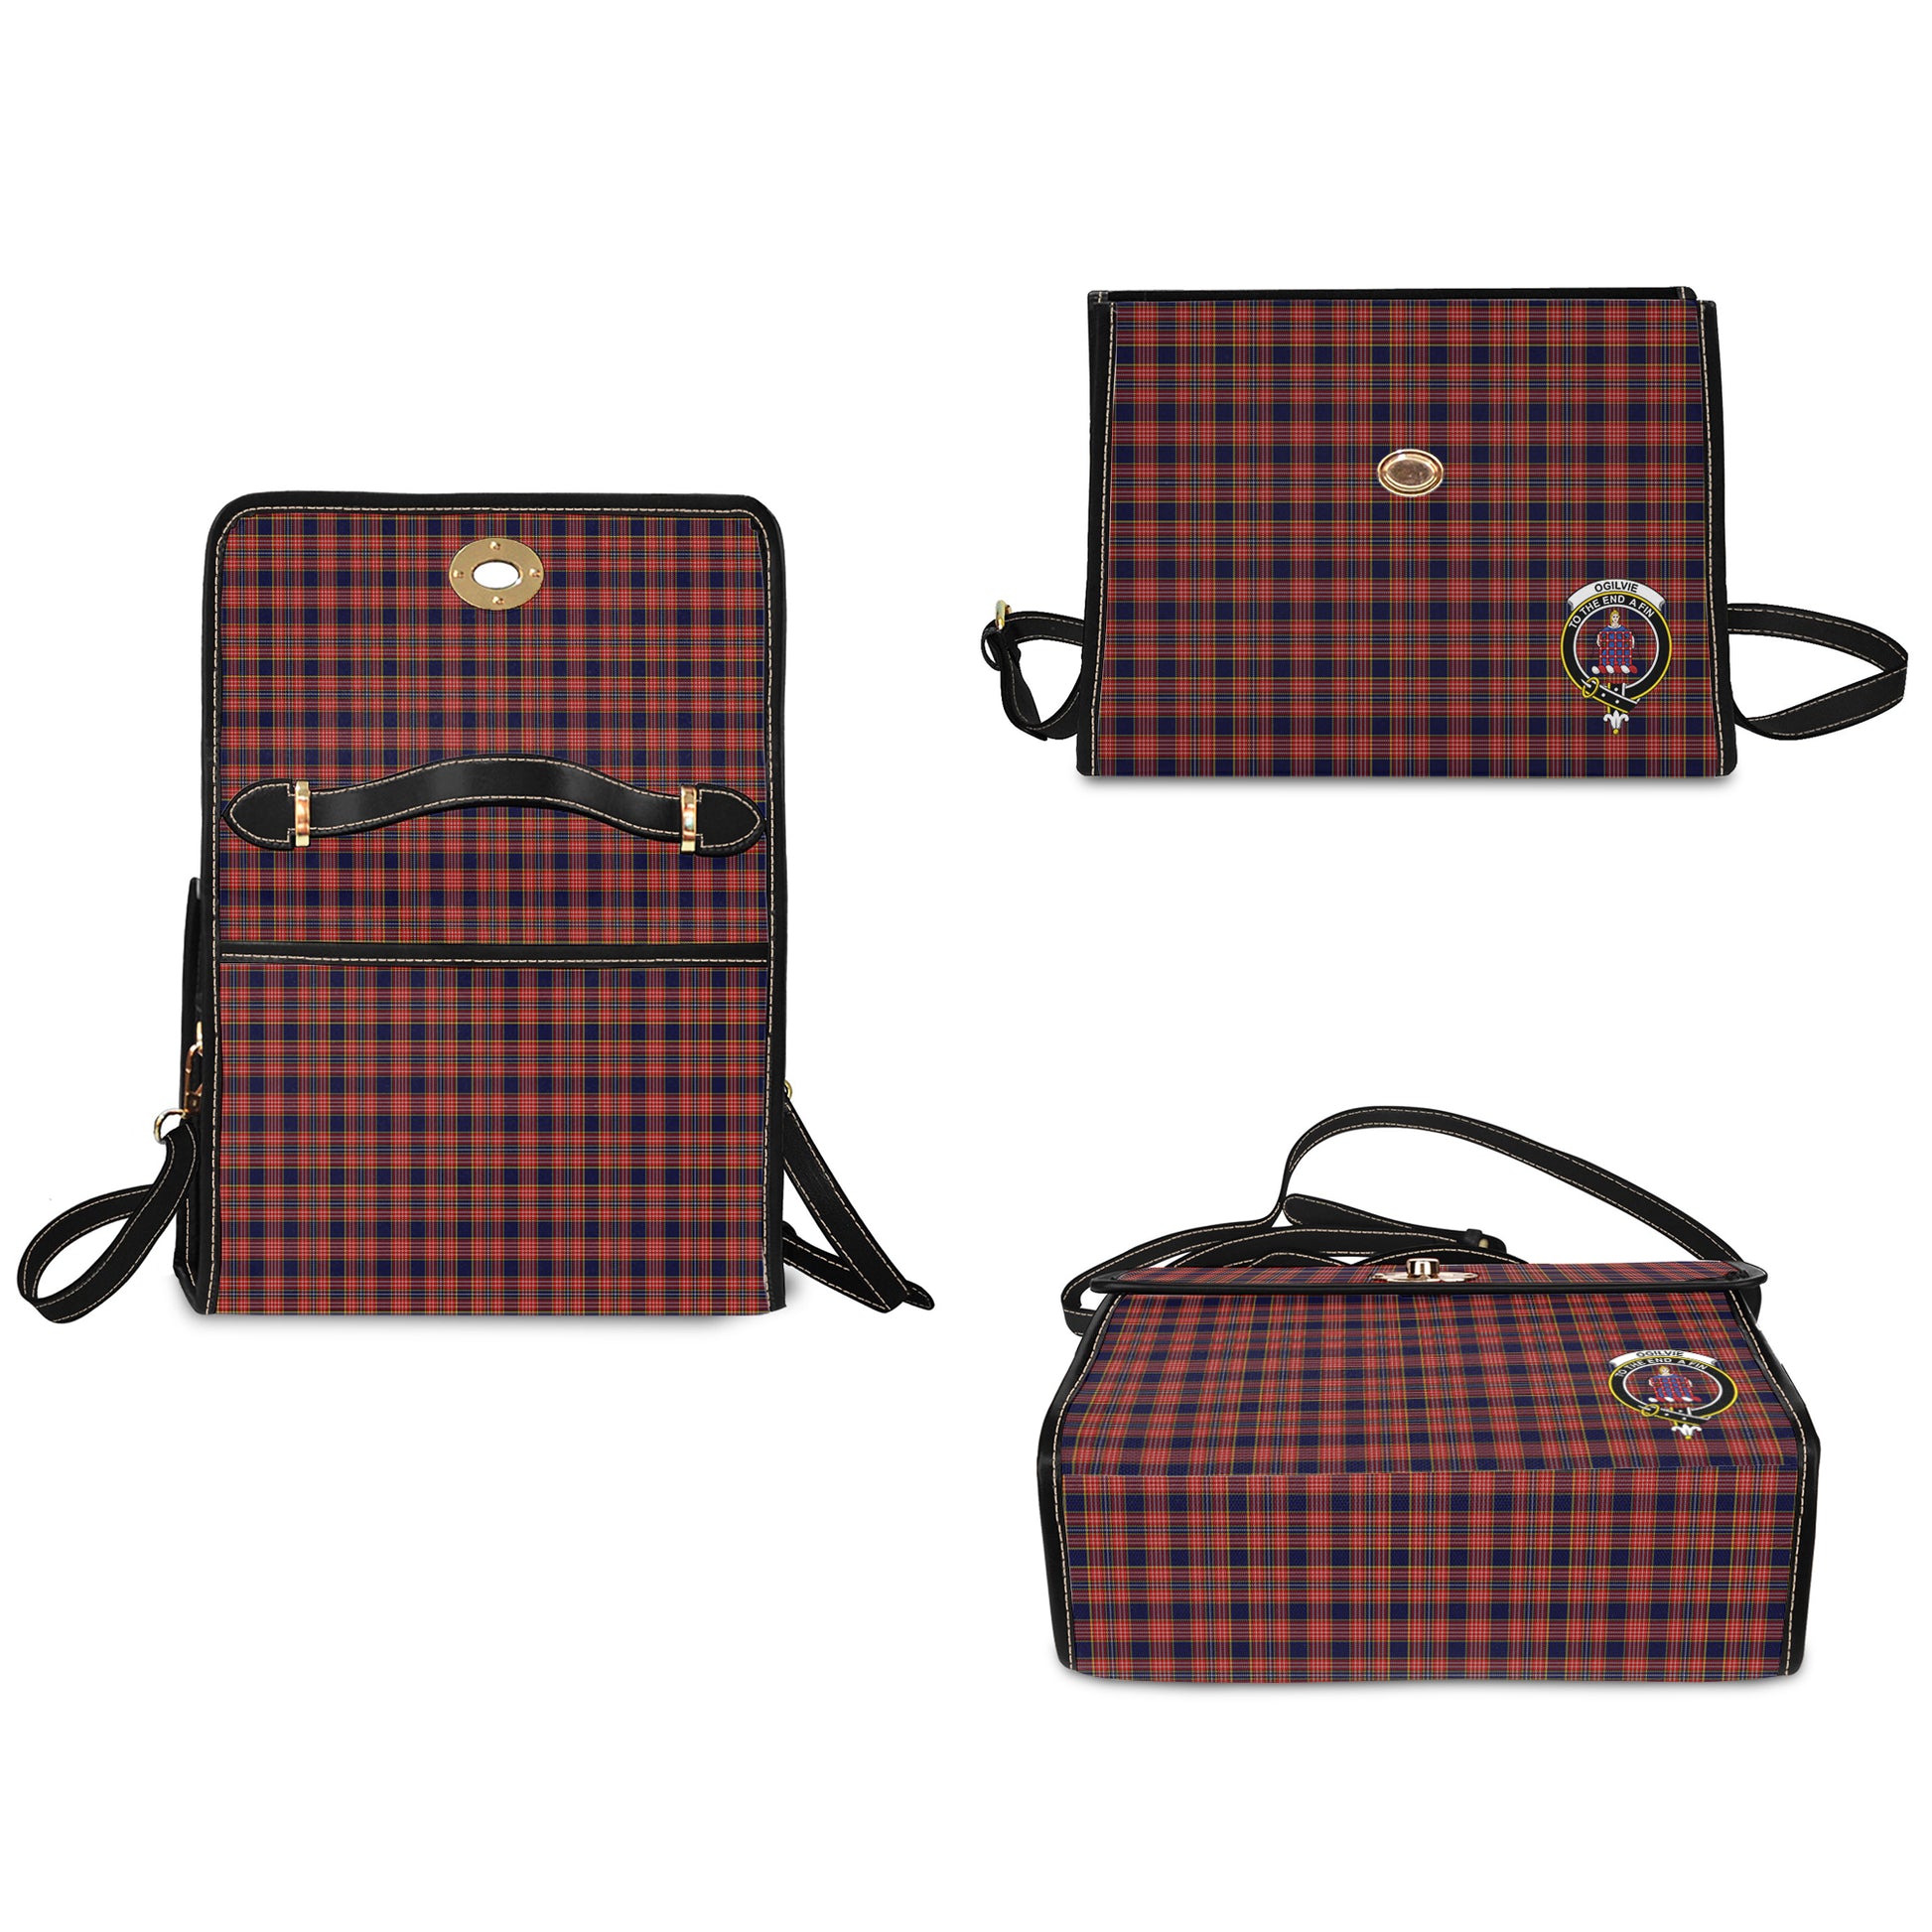 ogilvie-ogilvy-tartan-leather-strap-waterproof-canvas-bag-with-family-crest